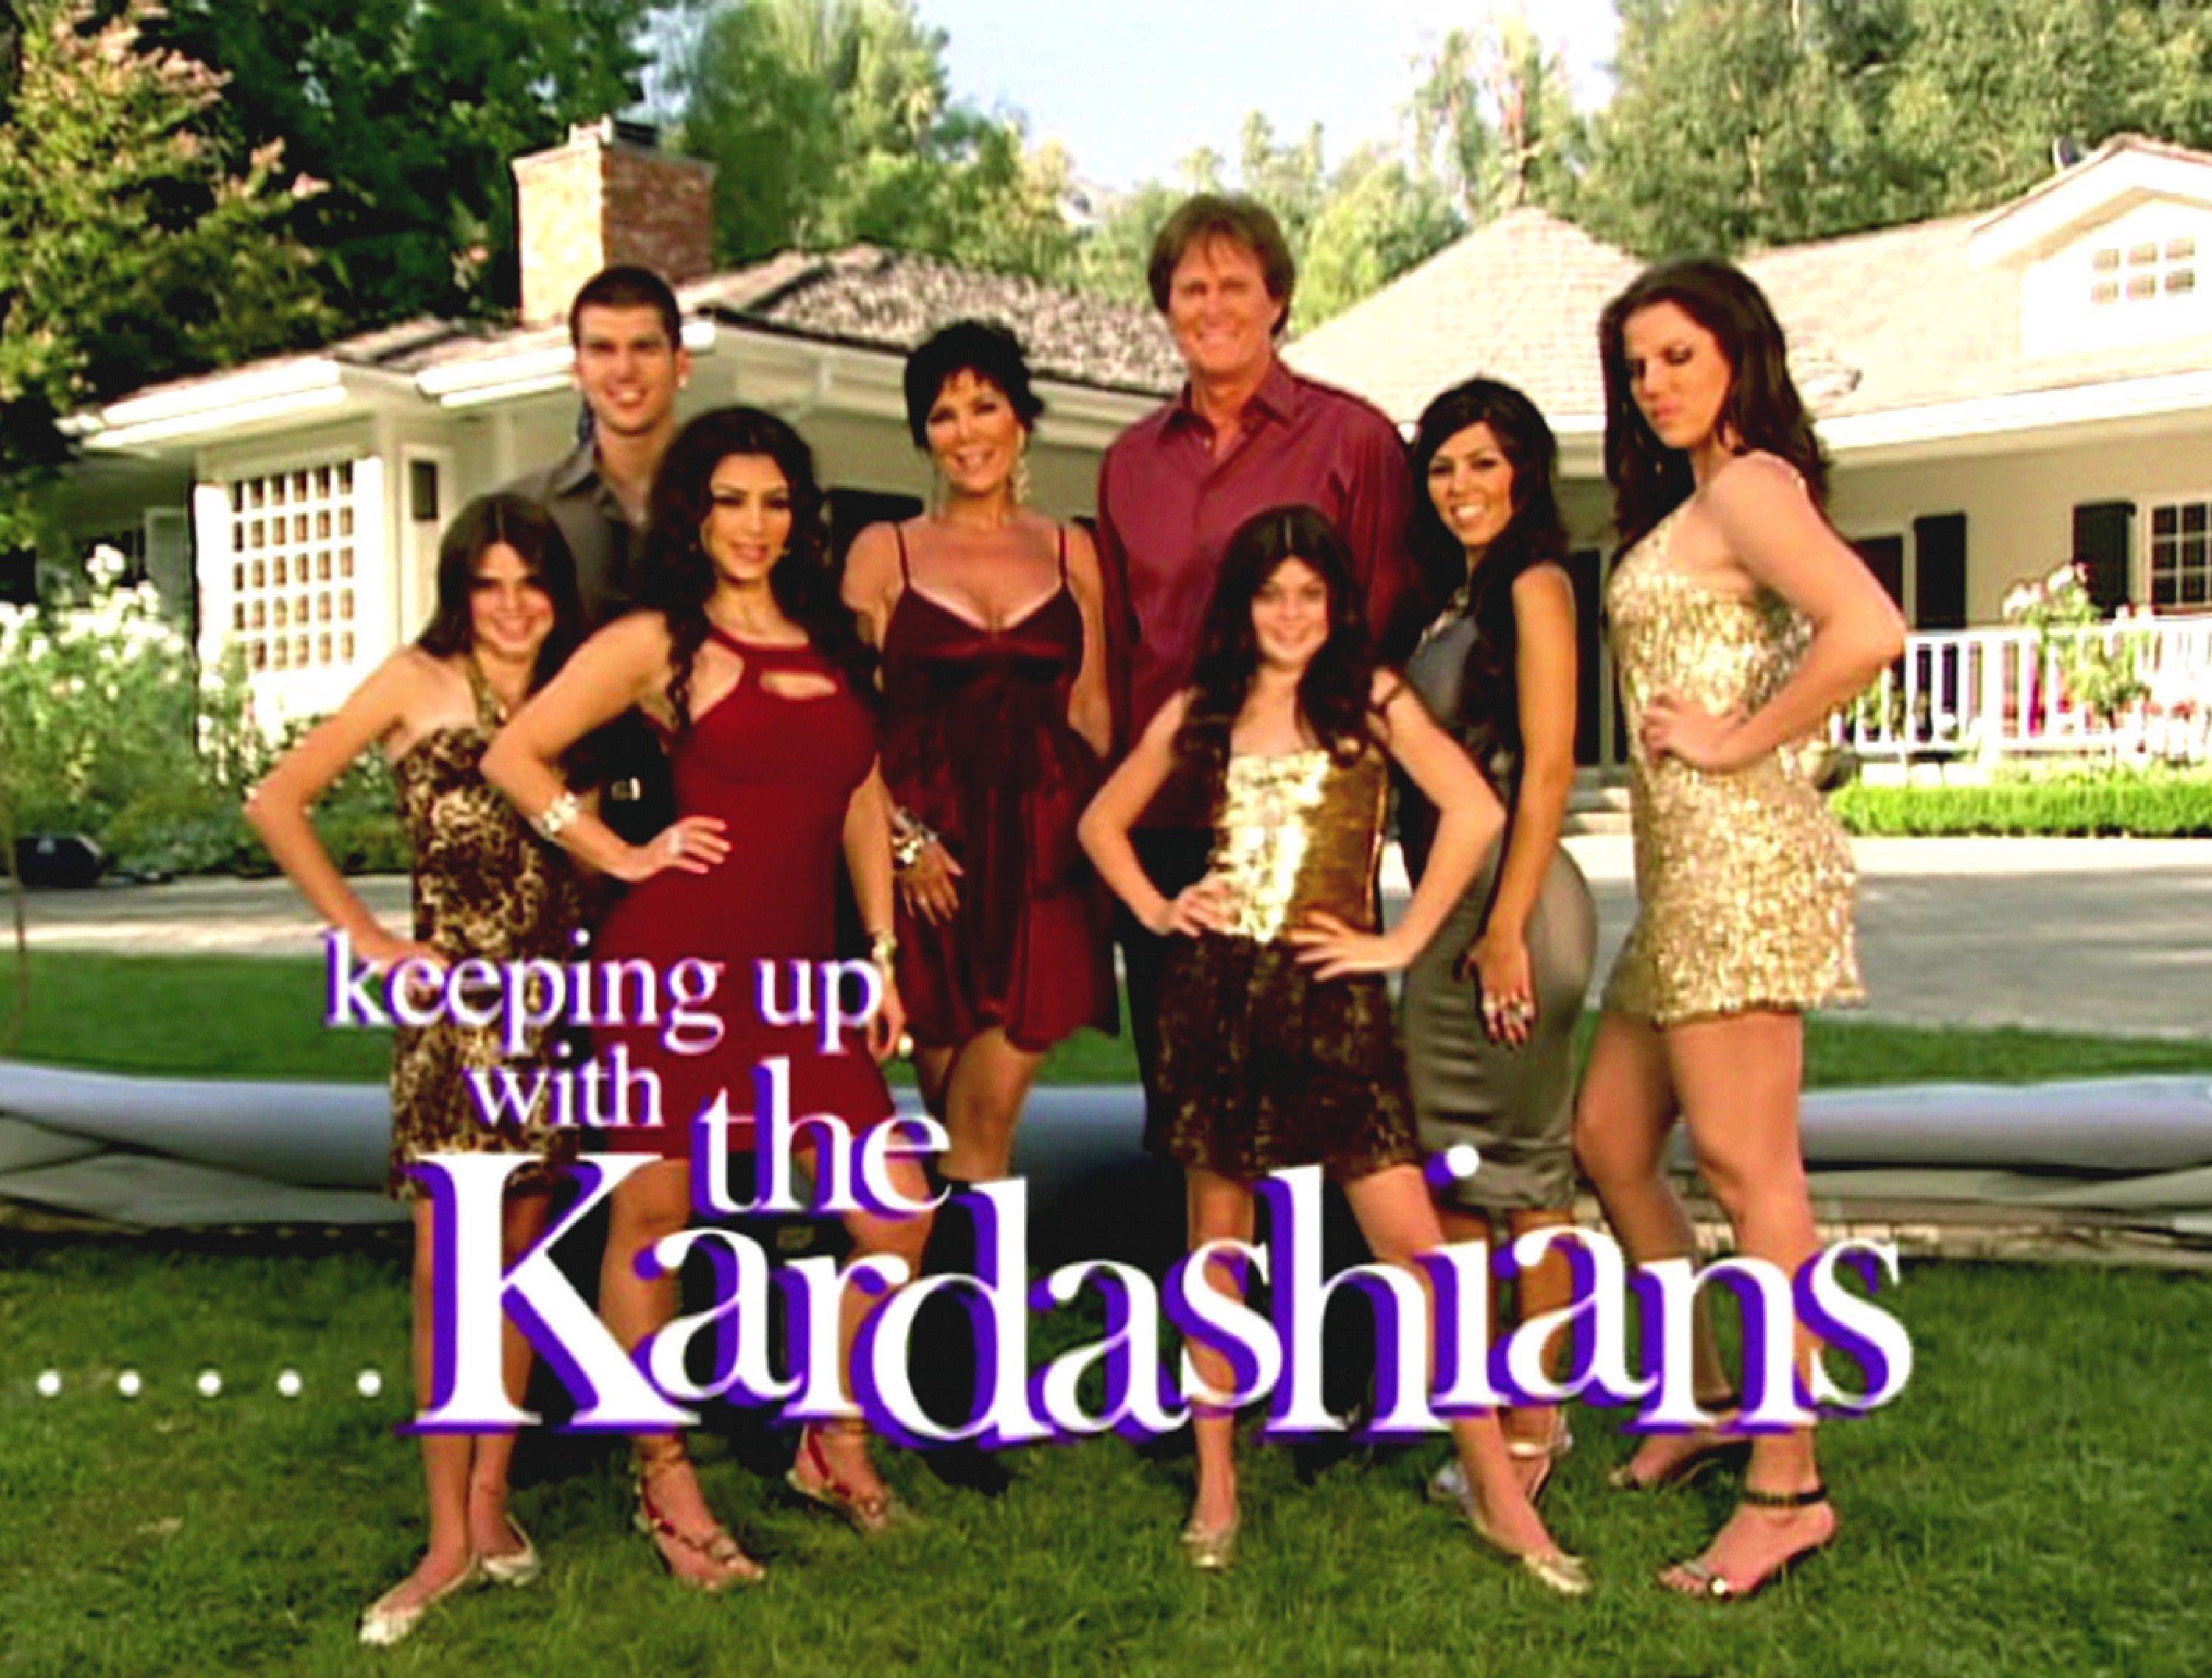 A Look Back on Some of the Most Memorable KUWTK Moments